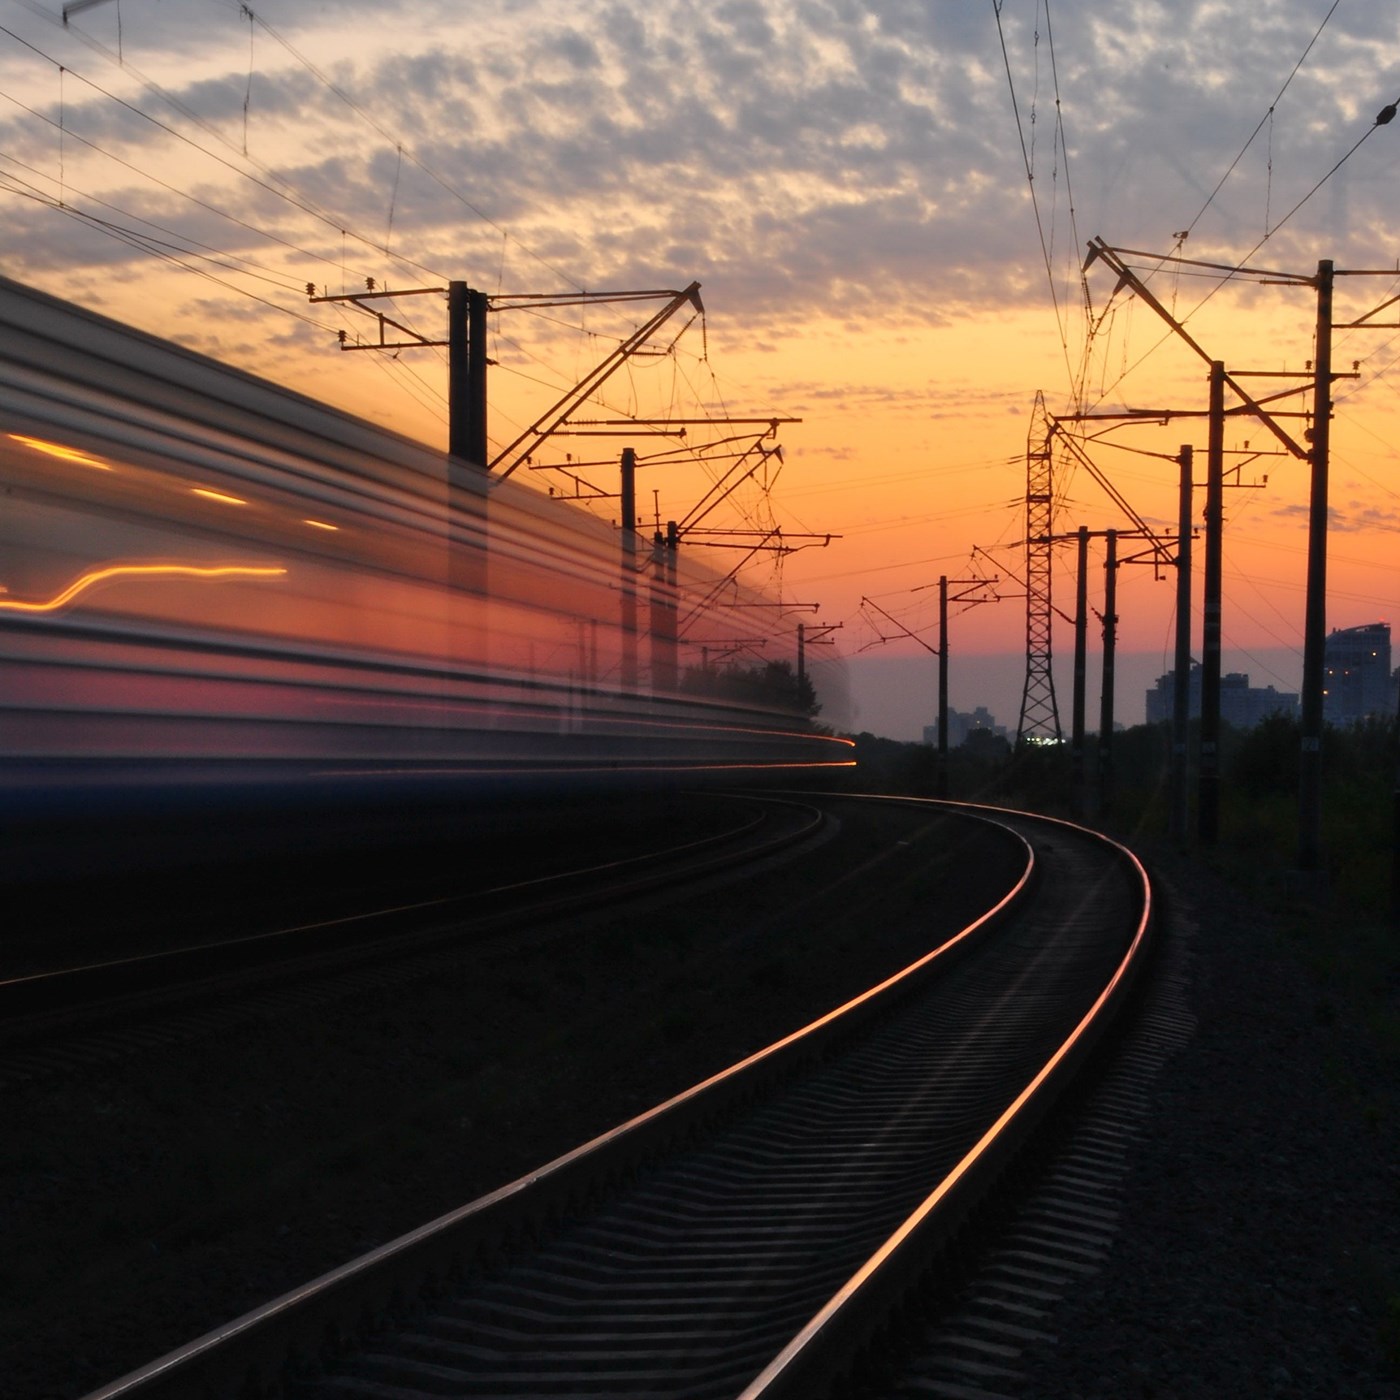 A train speeds past rows of electricity pylons at sunset.